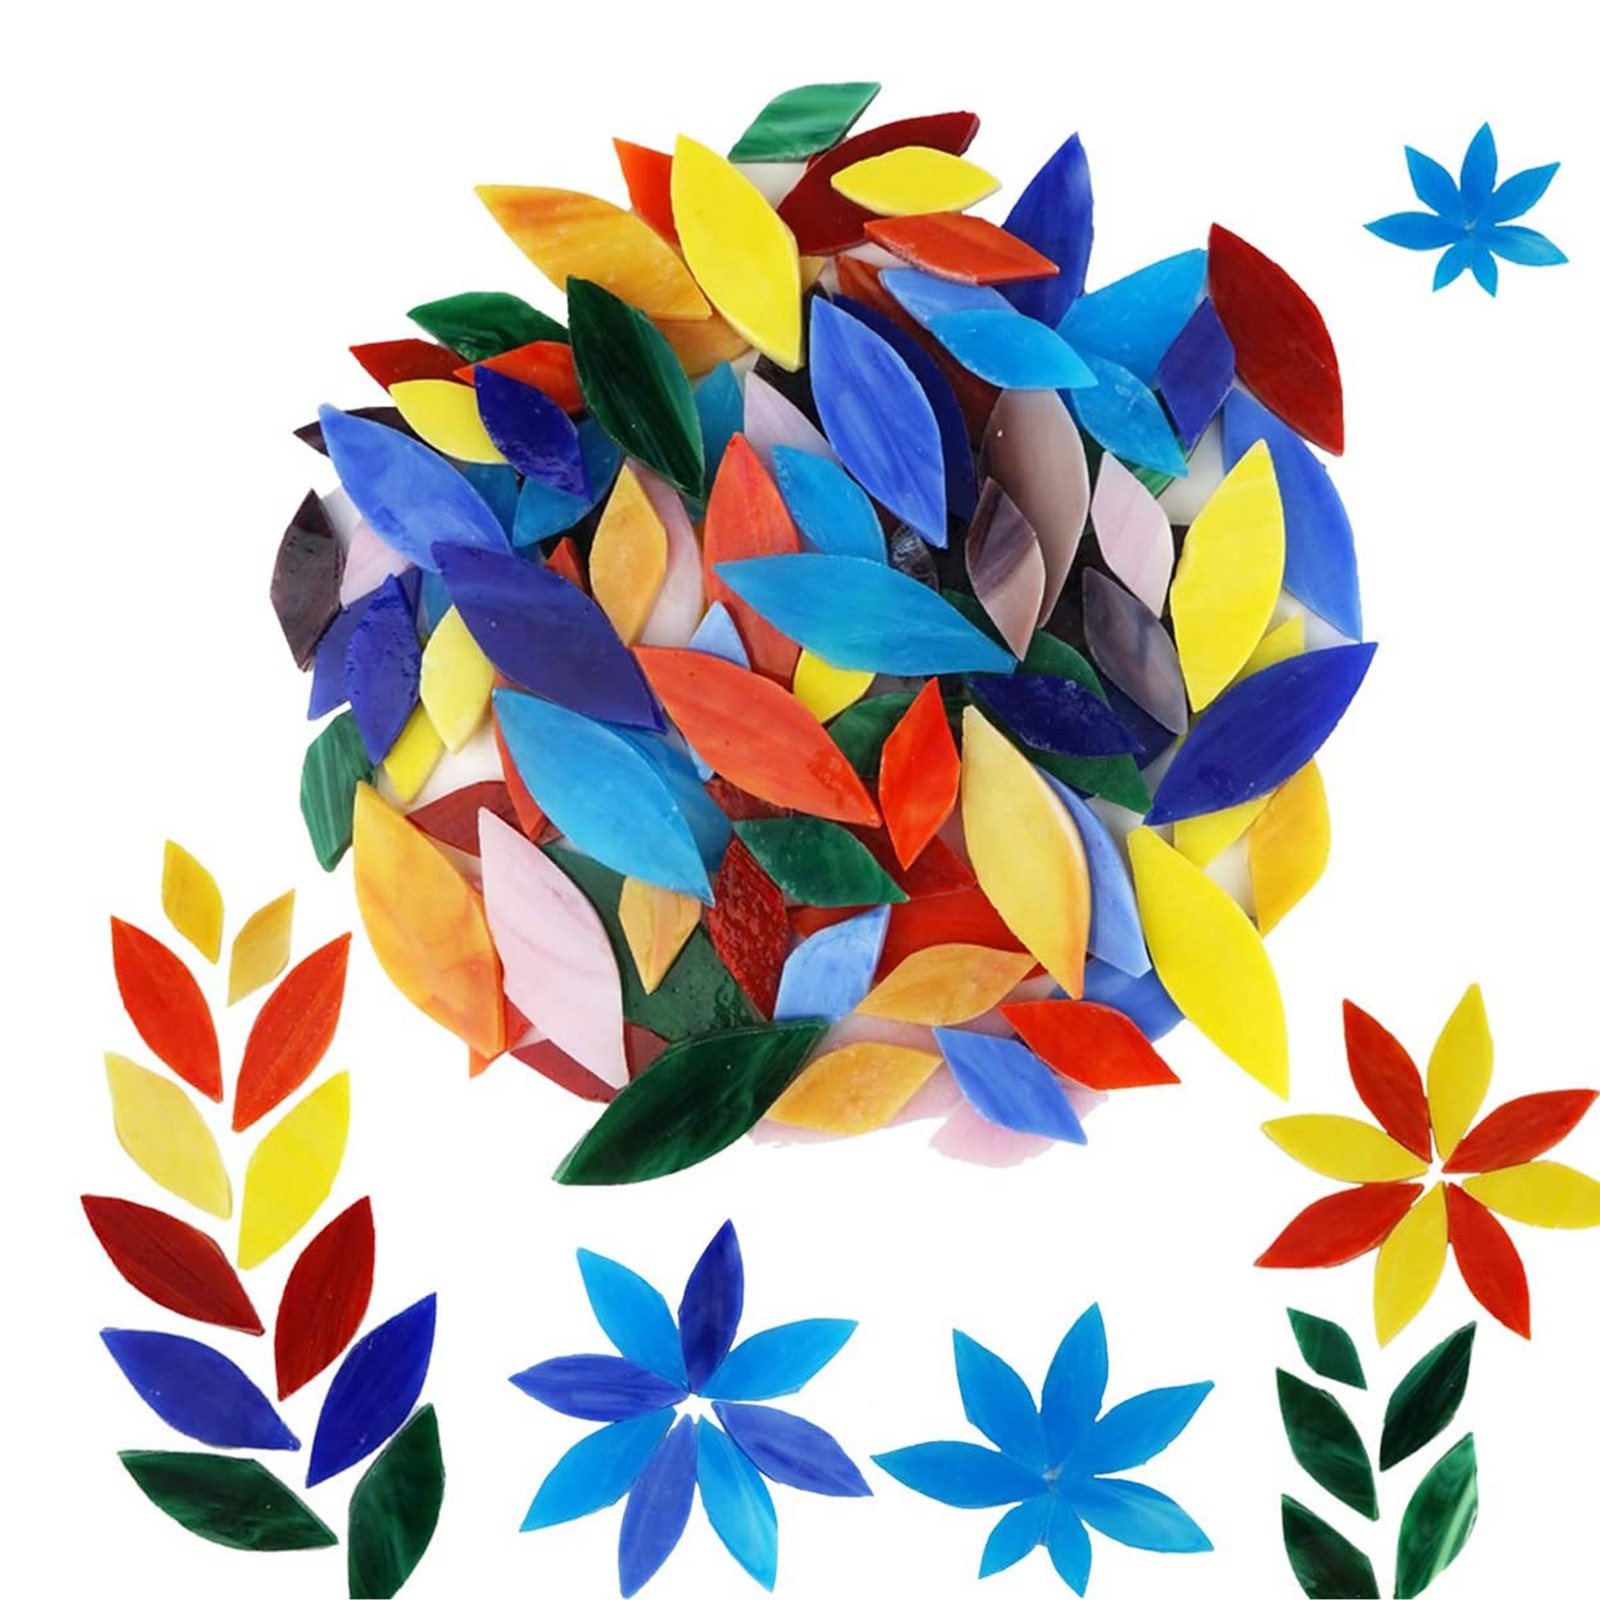 100x Mixed Colors Petal Mosaic Tiles Hand-Cut Stained Glass Art Decoration